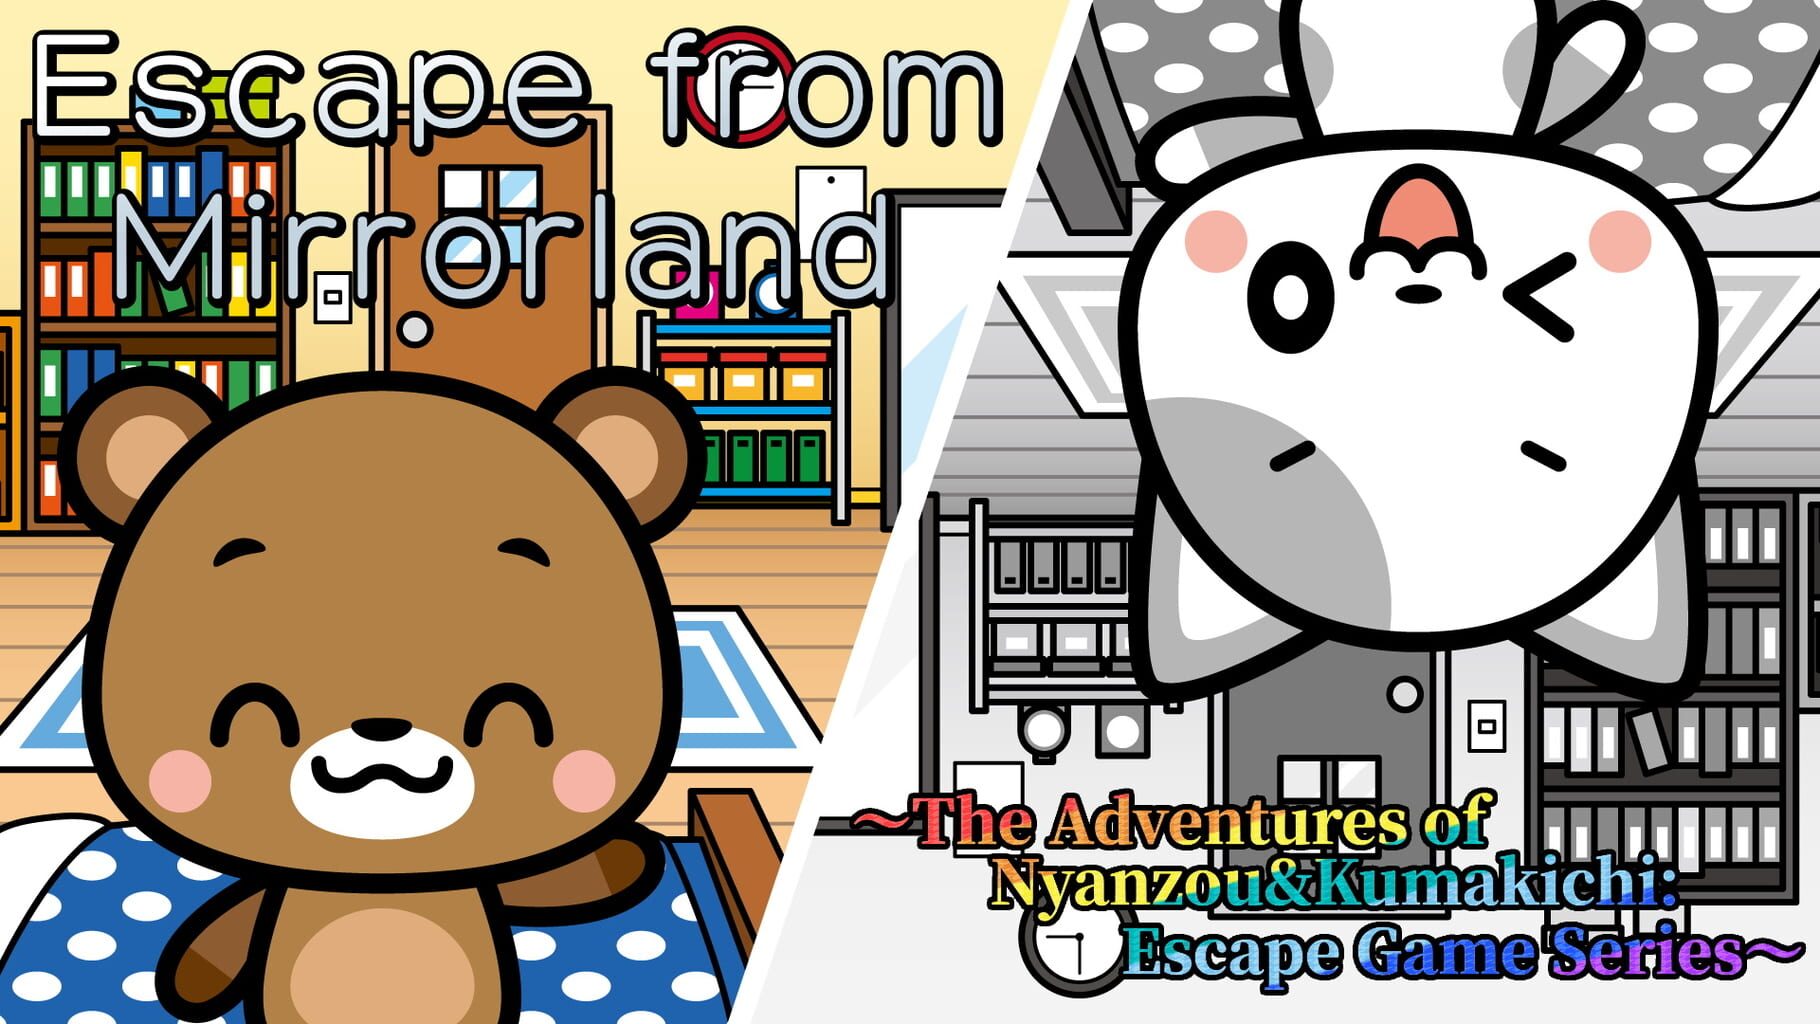 Escape from Mirrorland: The Adventures of Nyanzou & Kumakichi - Escape Game Series artwork